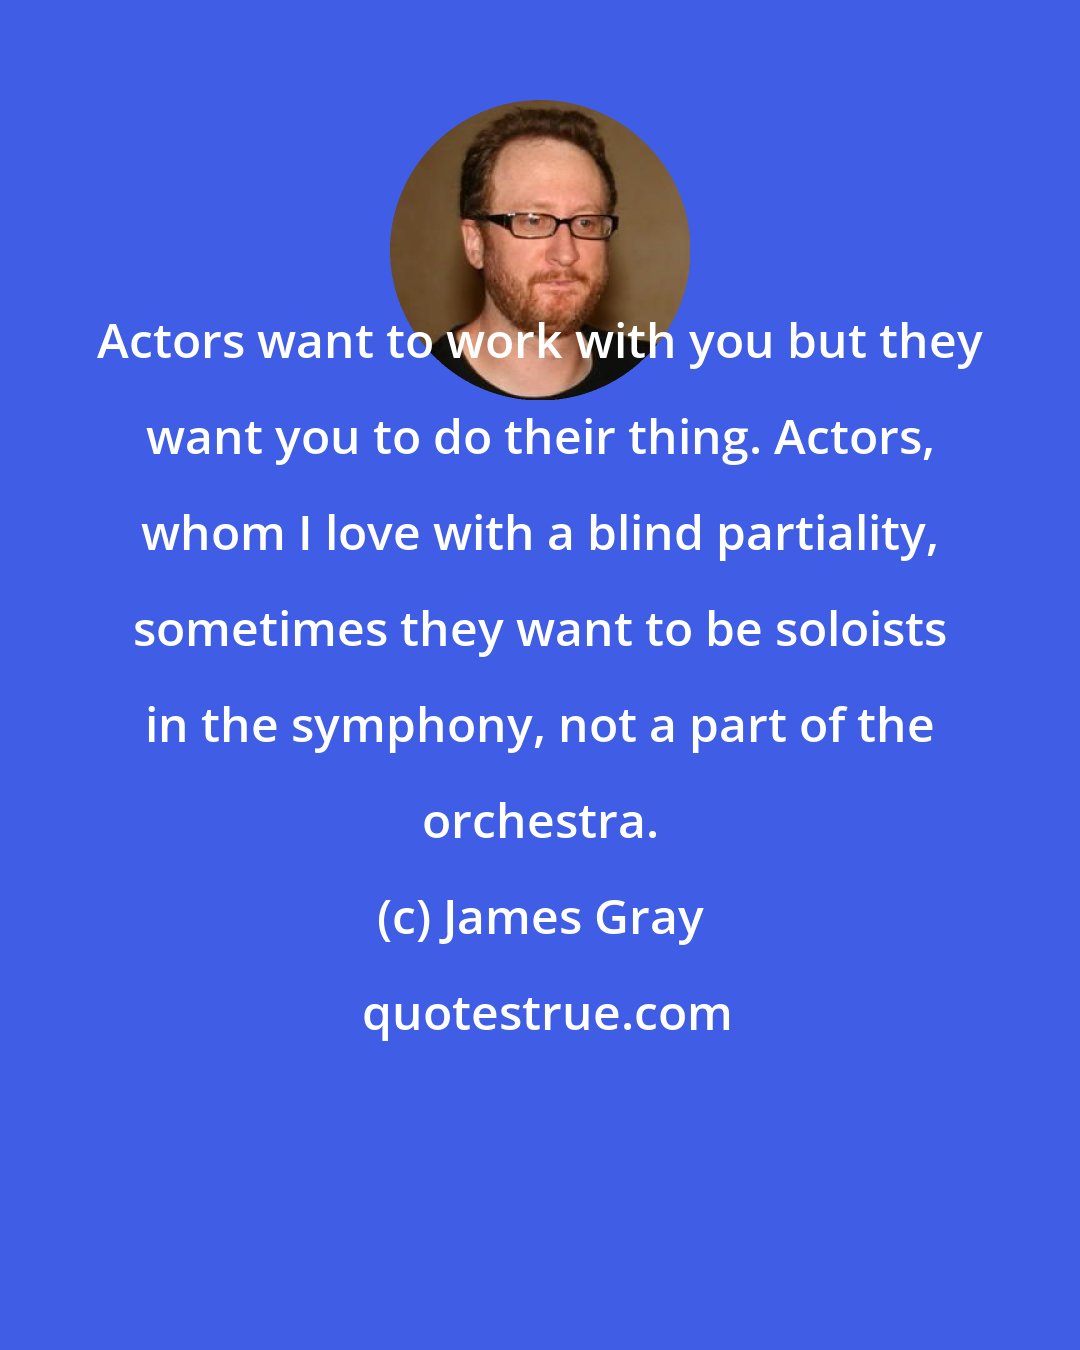 James Gray: Actors want to work with you but they want you to do their thing. Actors, whom I love with a blind partiality, sometimes they want to be soloists in the symphony, not a part of the orchestra.